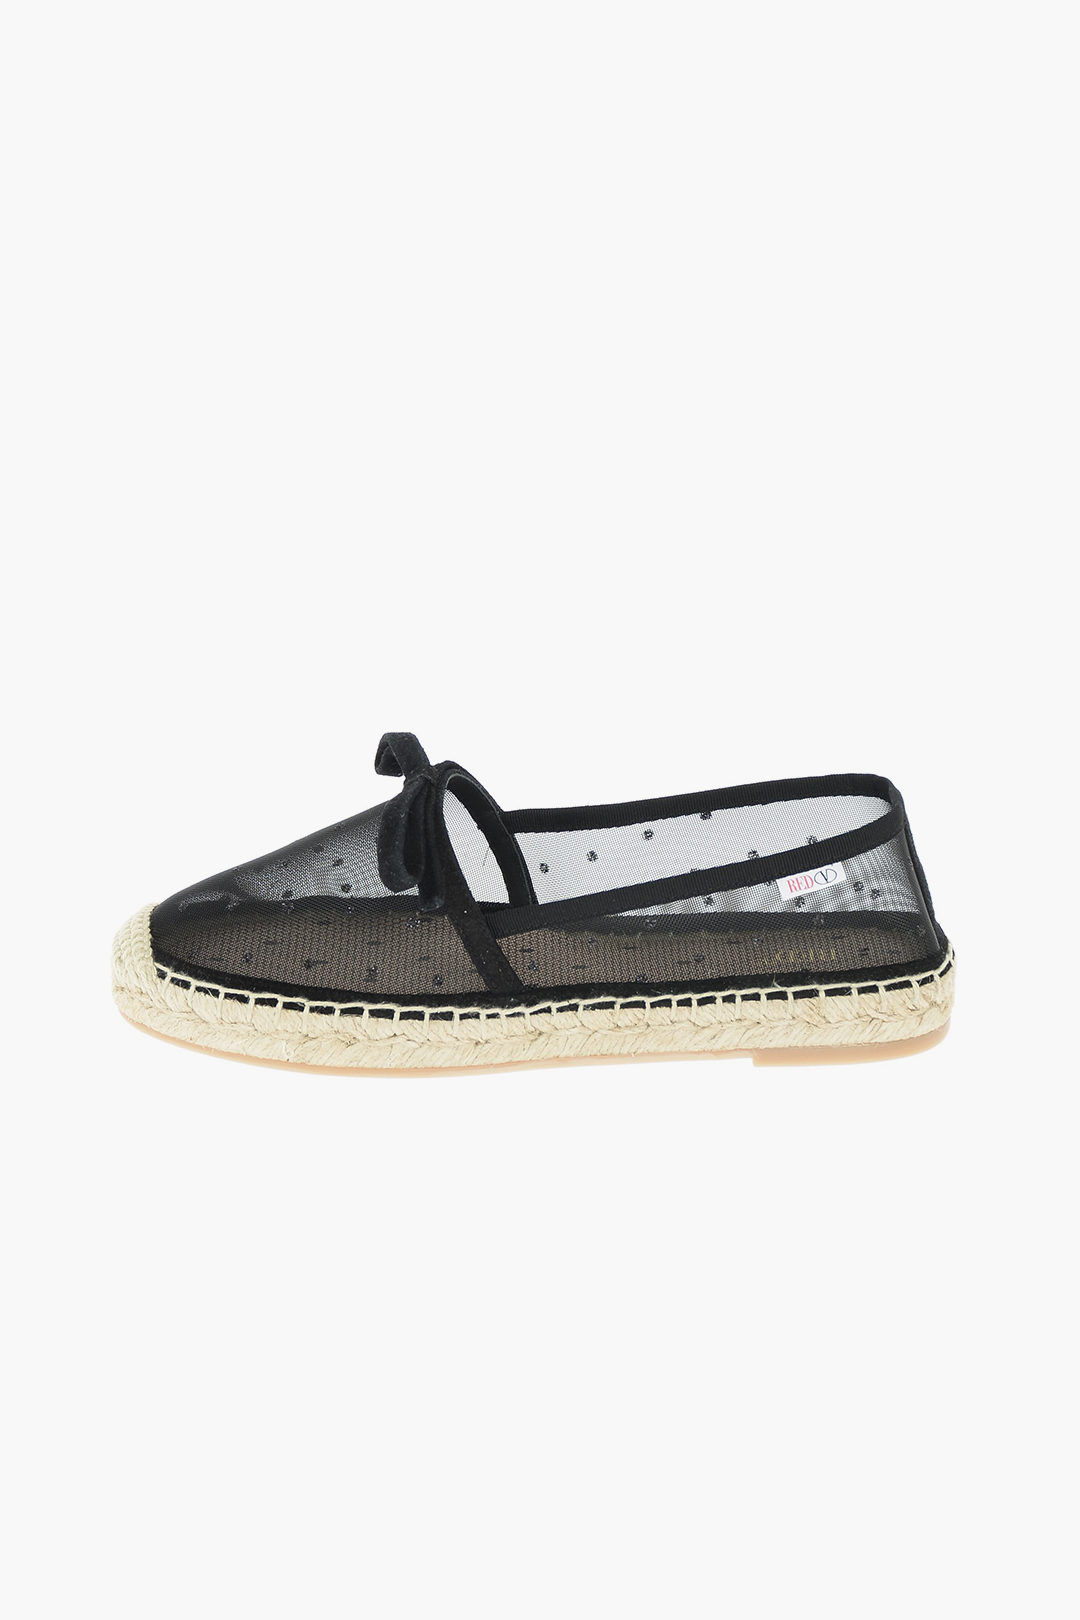 Red Valentino Mesh Fabric Espadrilles with Suede Leather Details 1,5 cm women Glamood Outlet